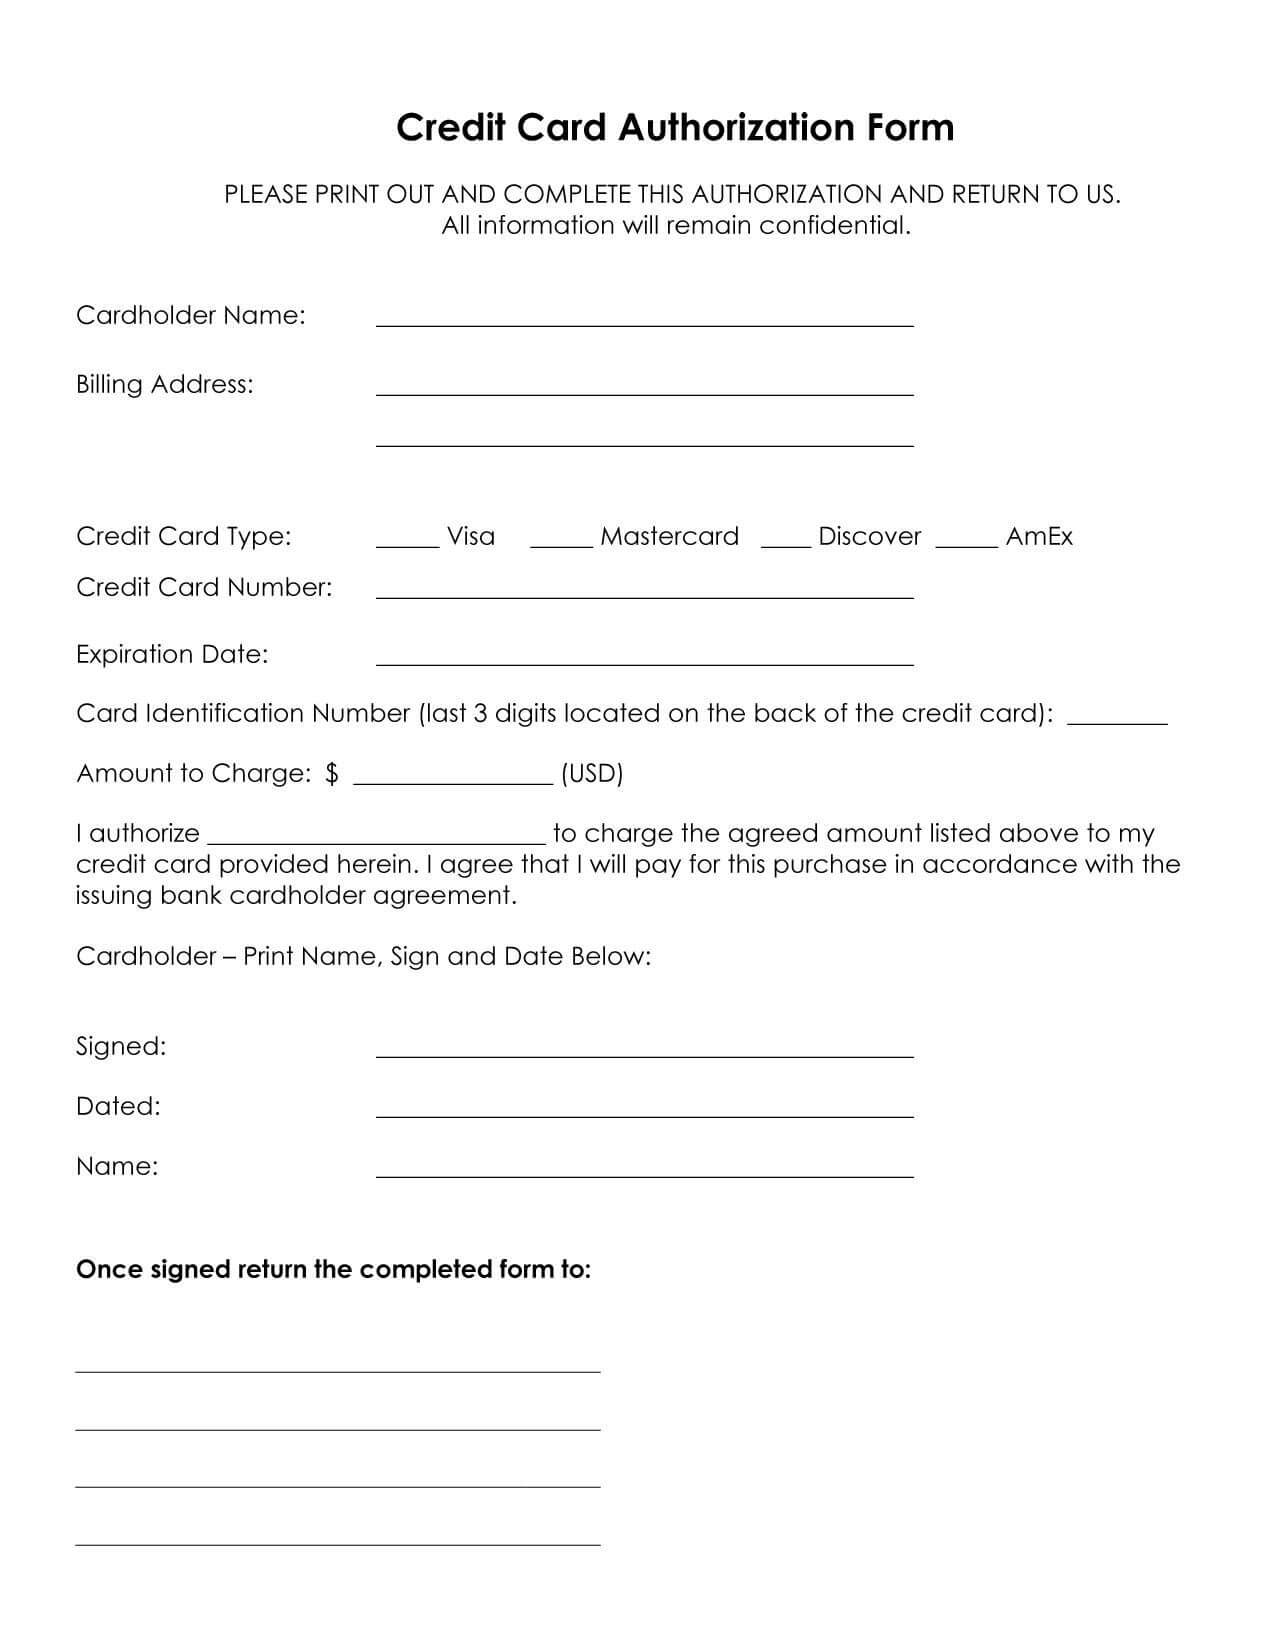 Credit Card Authorization Form Template In 2020 | Credit In Credit Card Billing Authorization Form Template